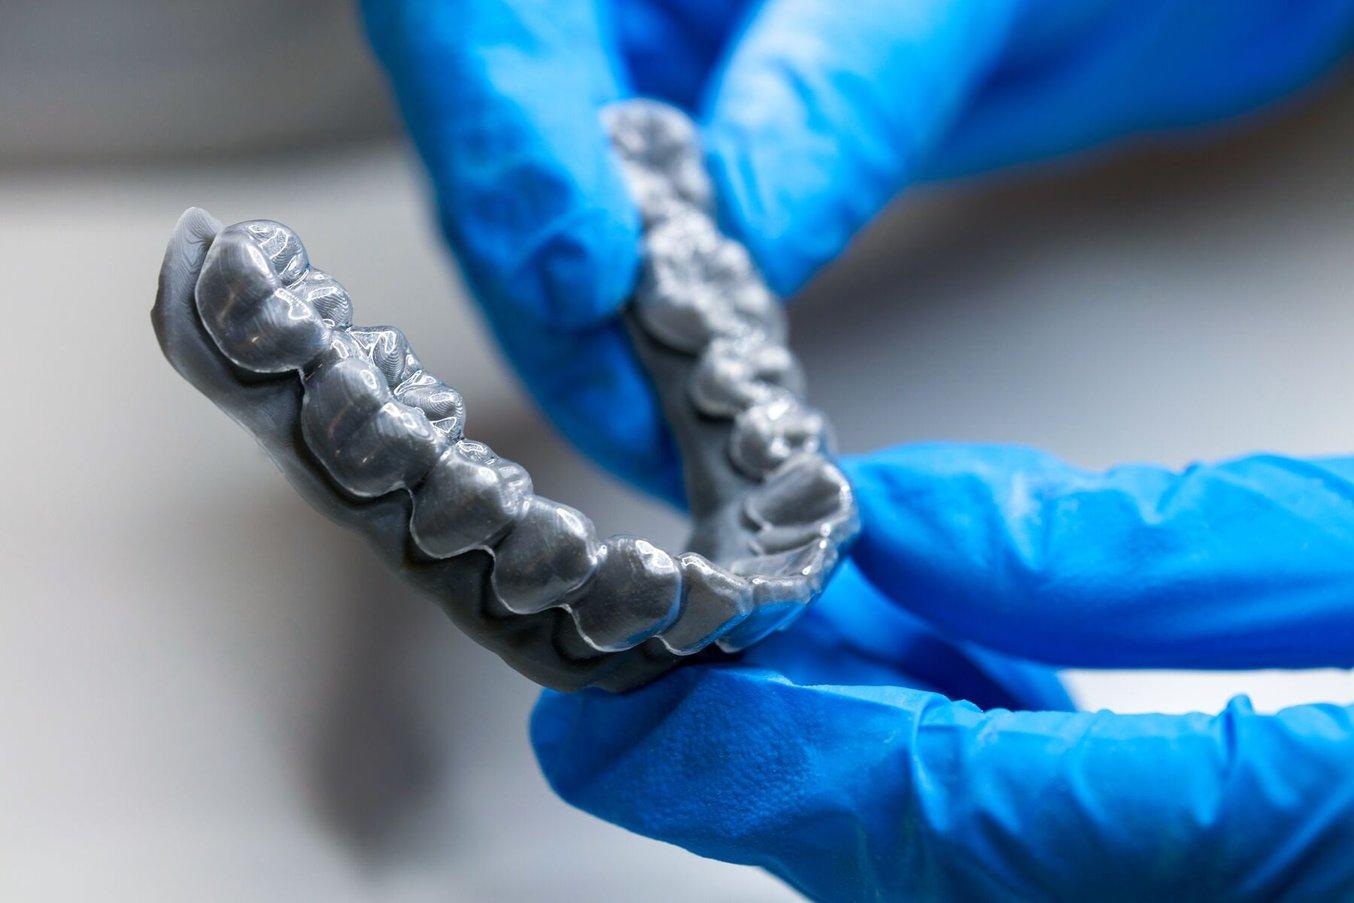 Vacuum forming and pressure forming over 3D printed models are the go-to methods for producing clear aligners in orthodontics.